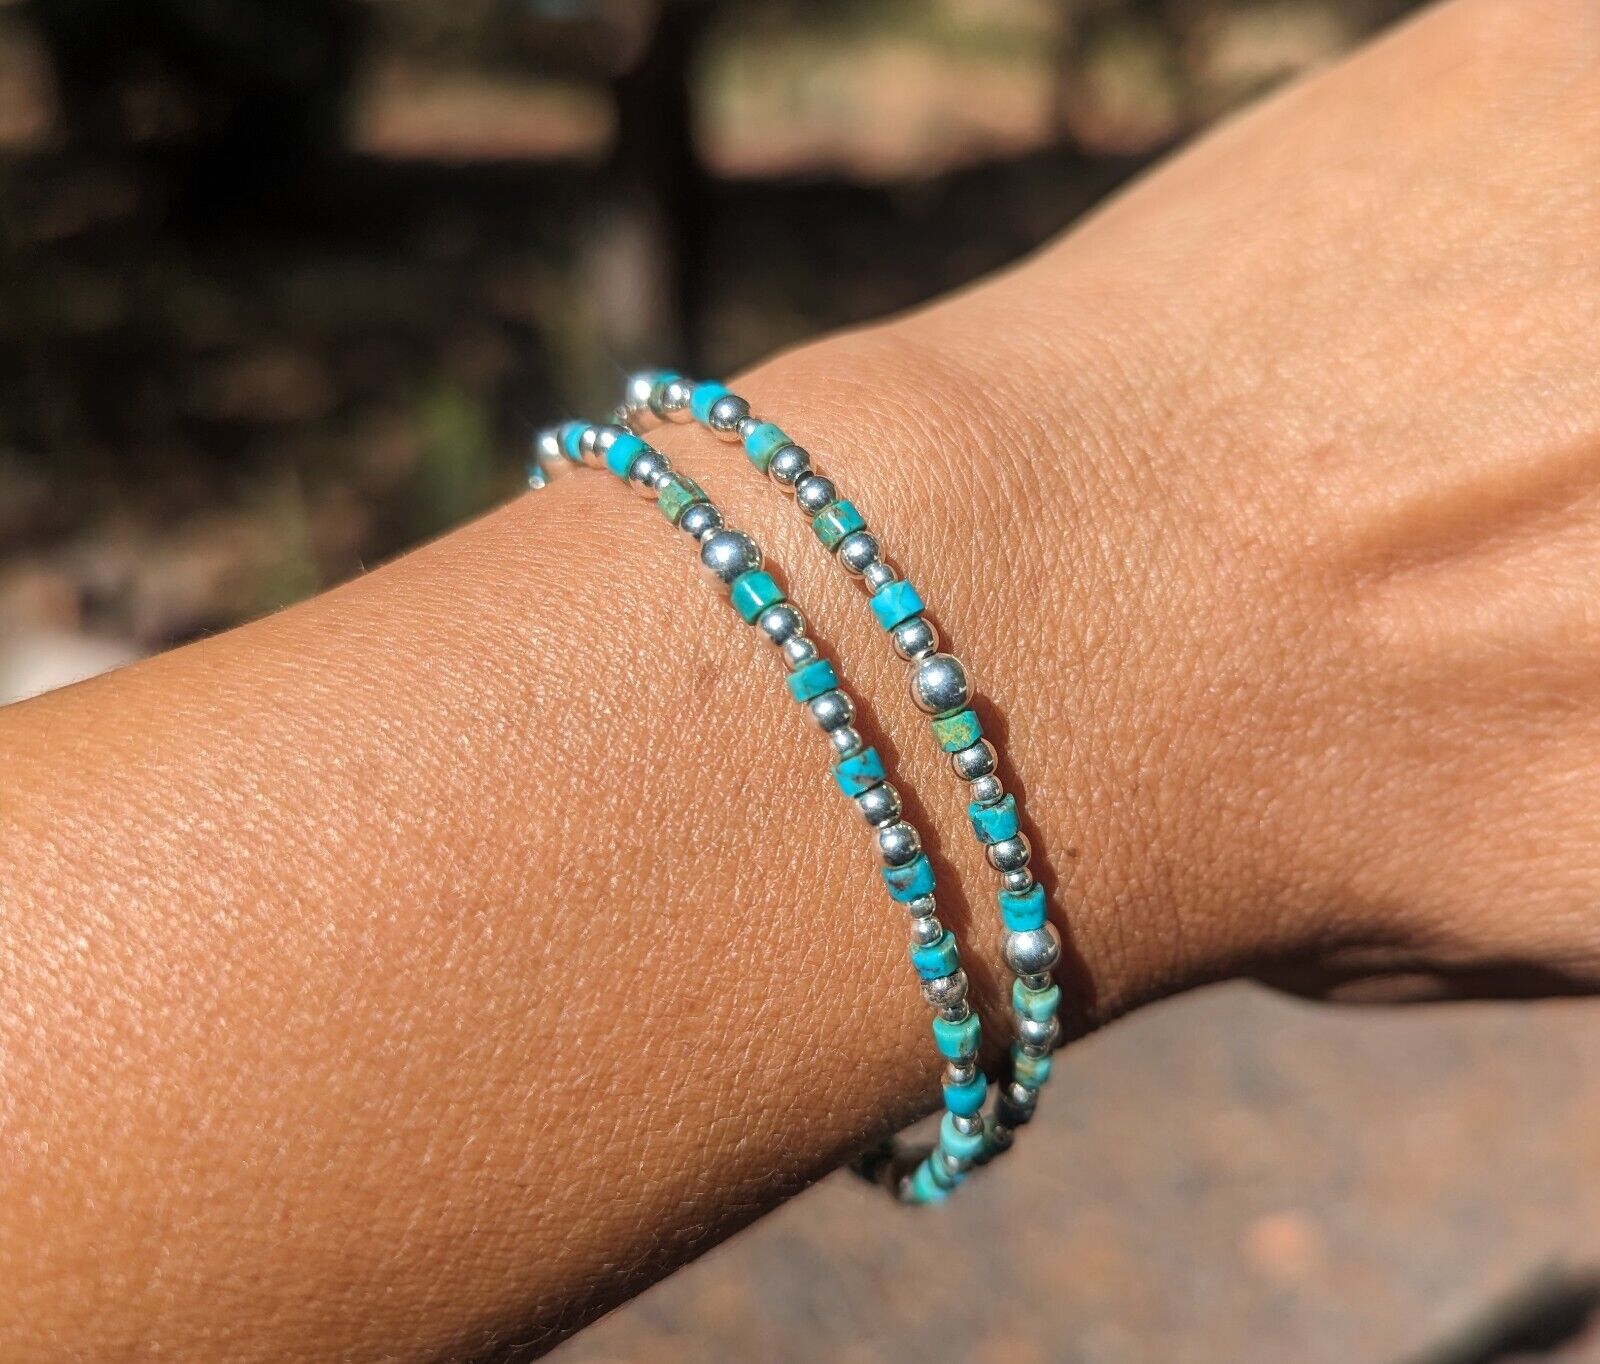 Navajo Women's Bracelet Royal Beauty Turquoise and Sterling Silver Beads Sz 7.5